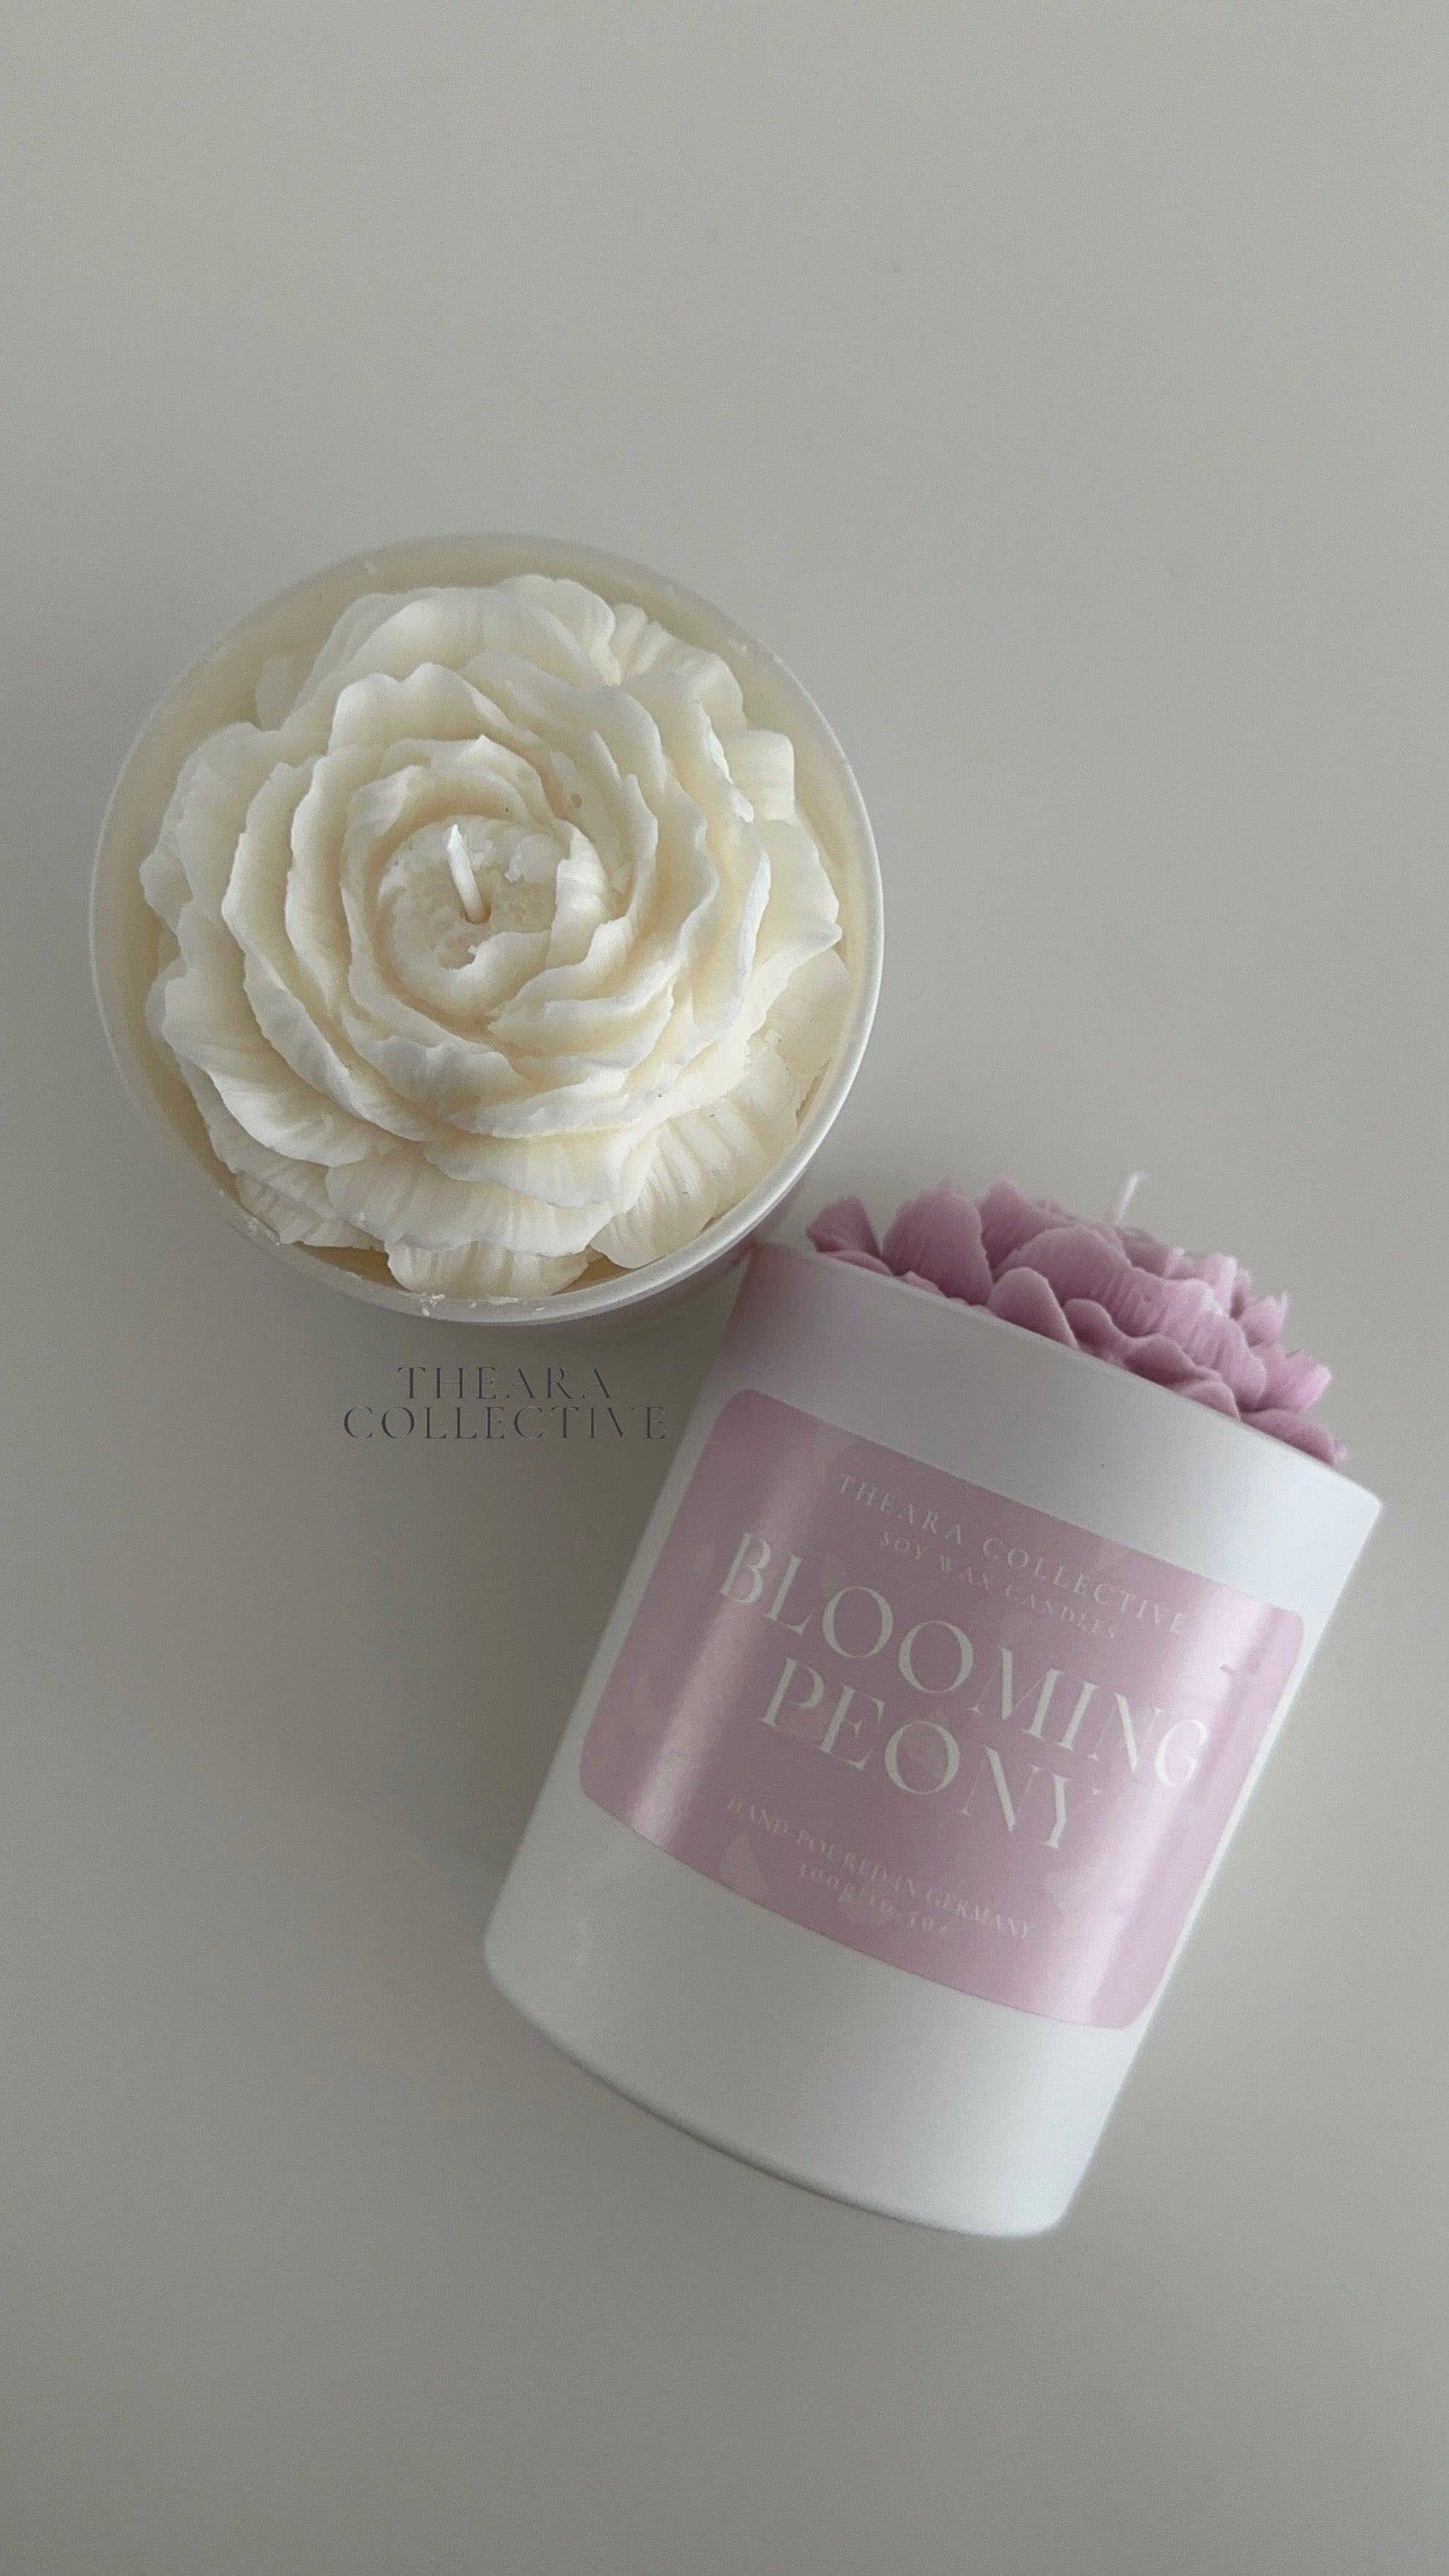 Blooming Peony - Limited Edition - Theara Collective